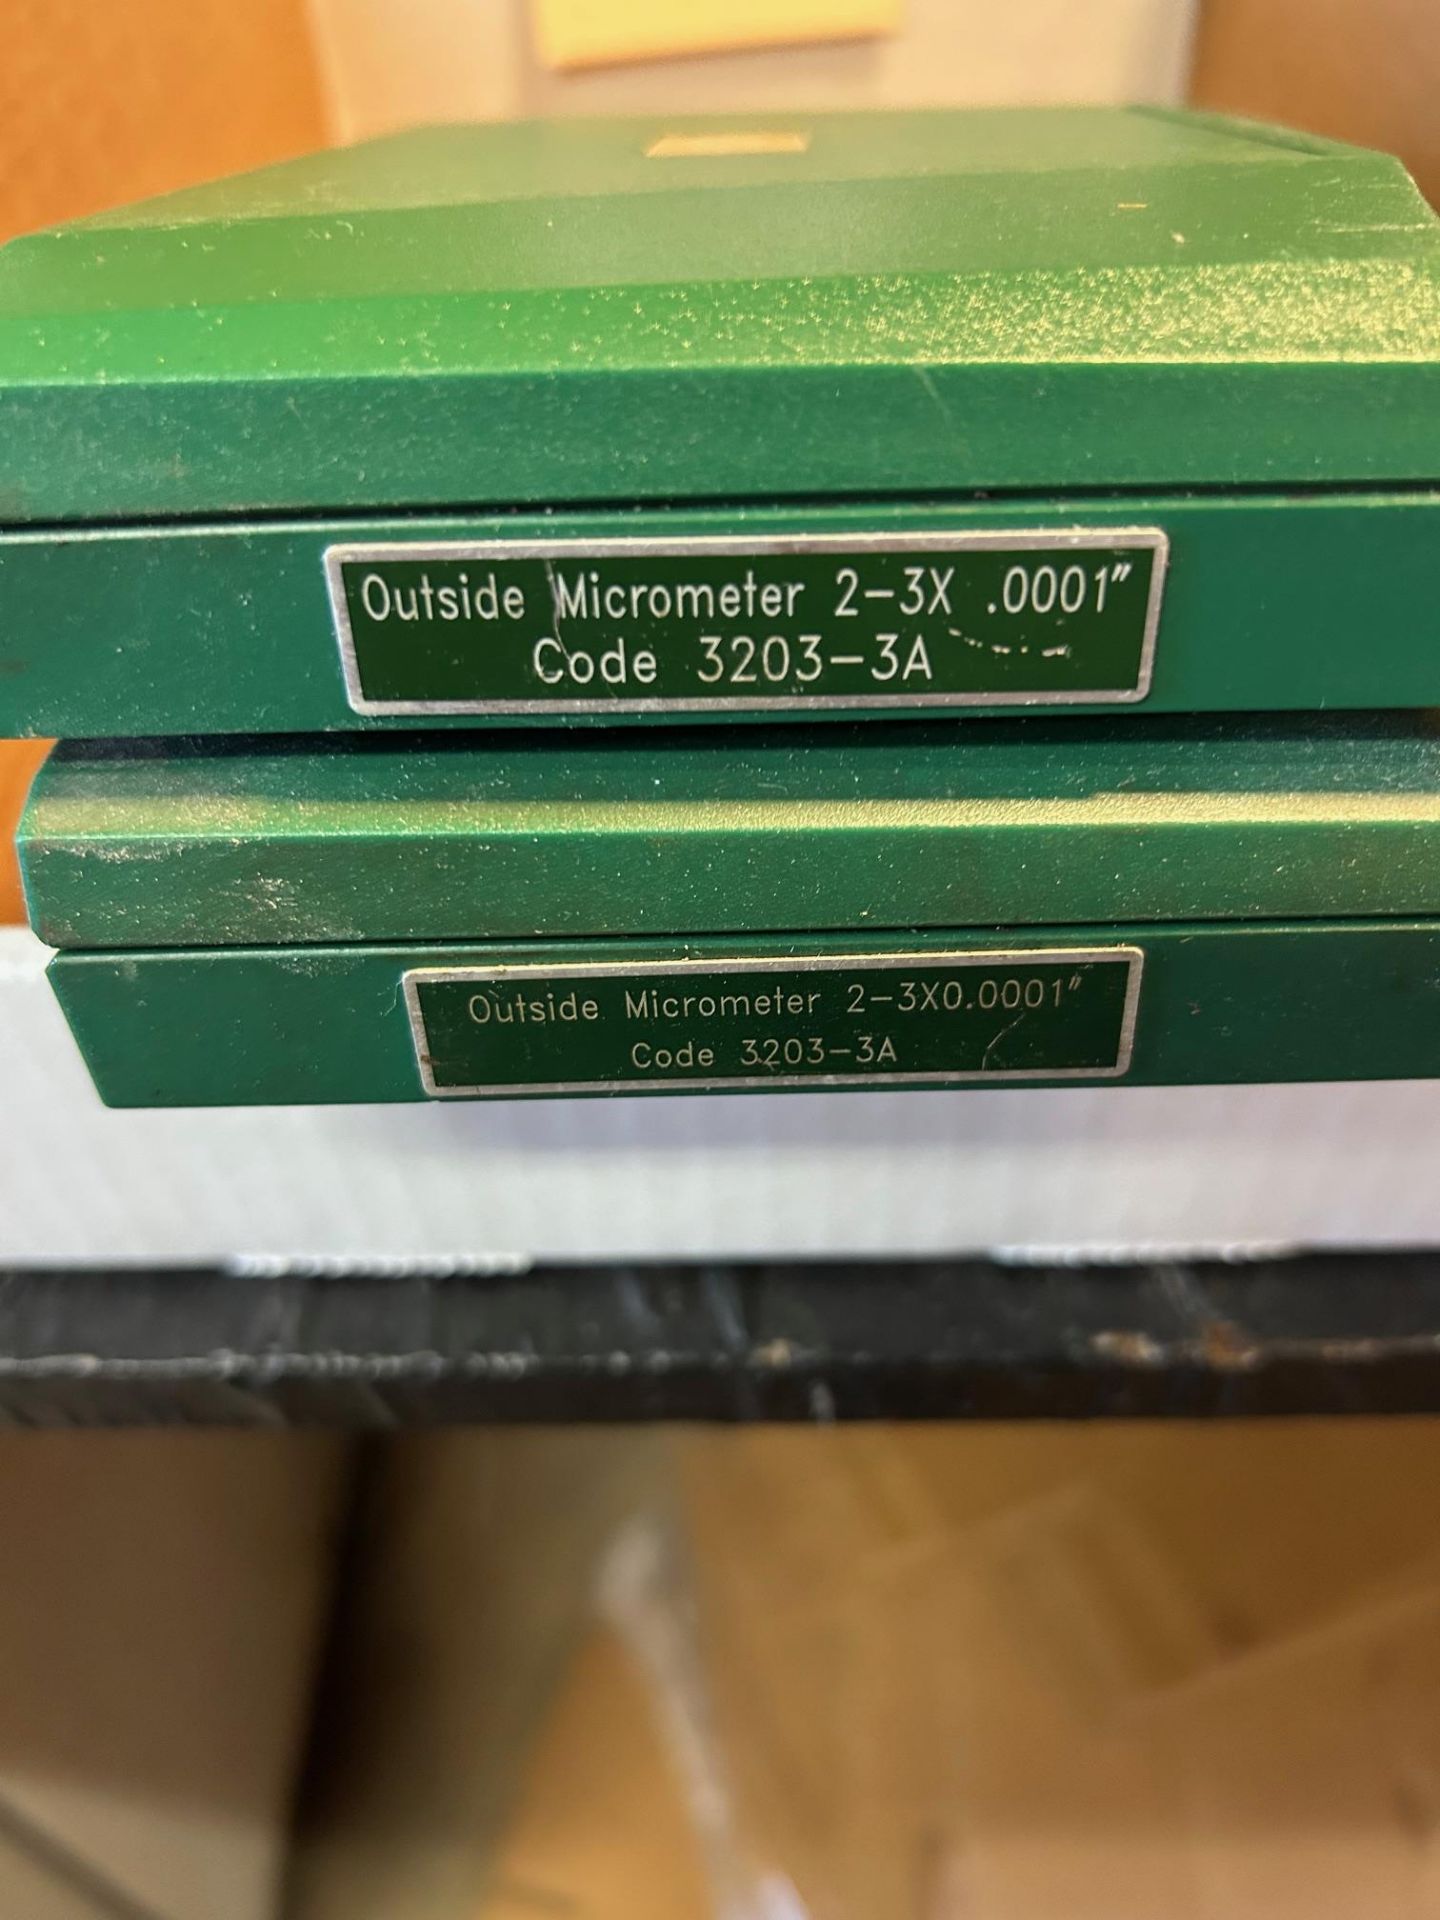 Insize Outside Micrometer 2-3X, .0001" (Lot of 2) - Image 5 of 6